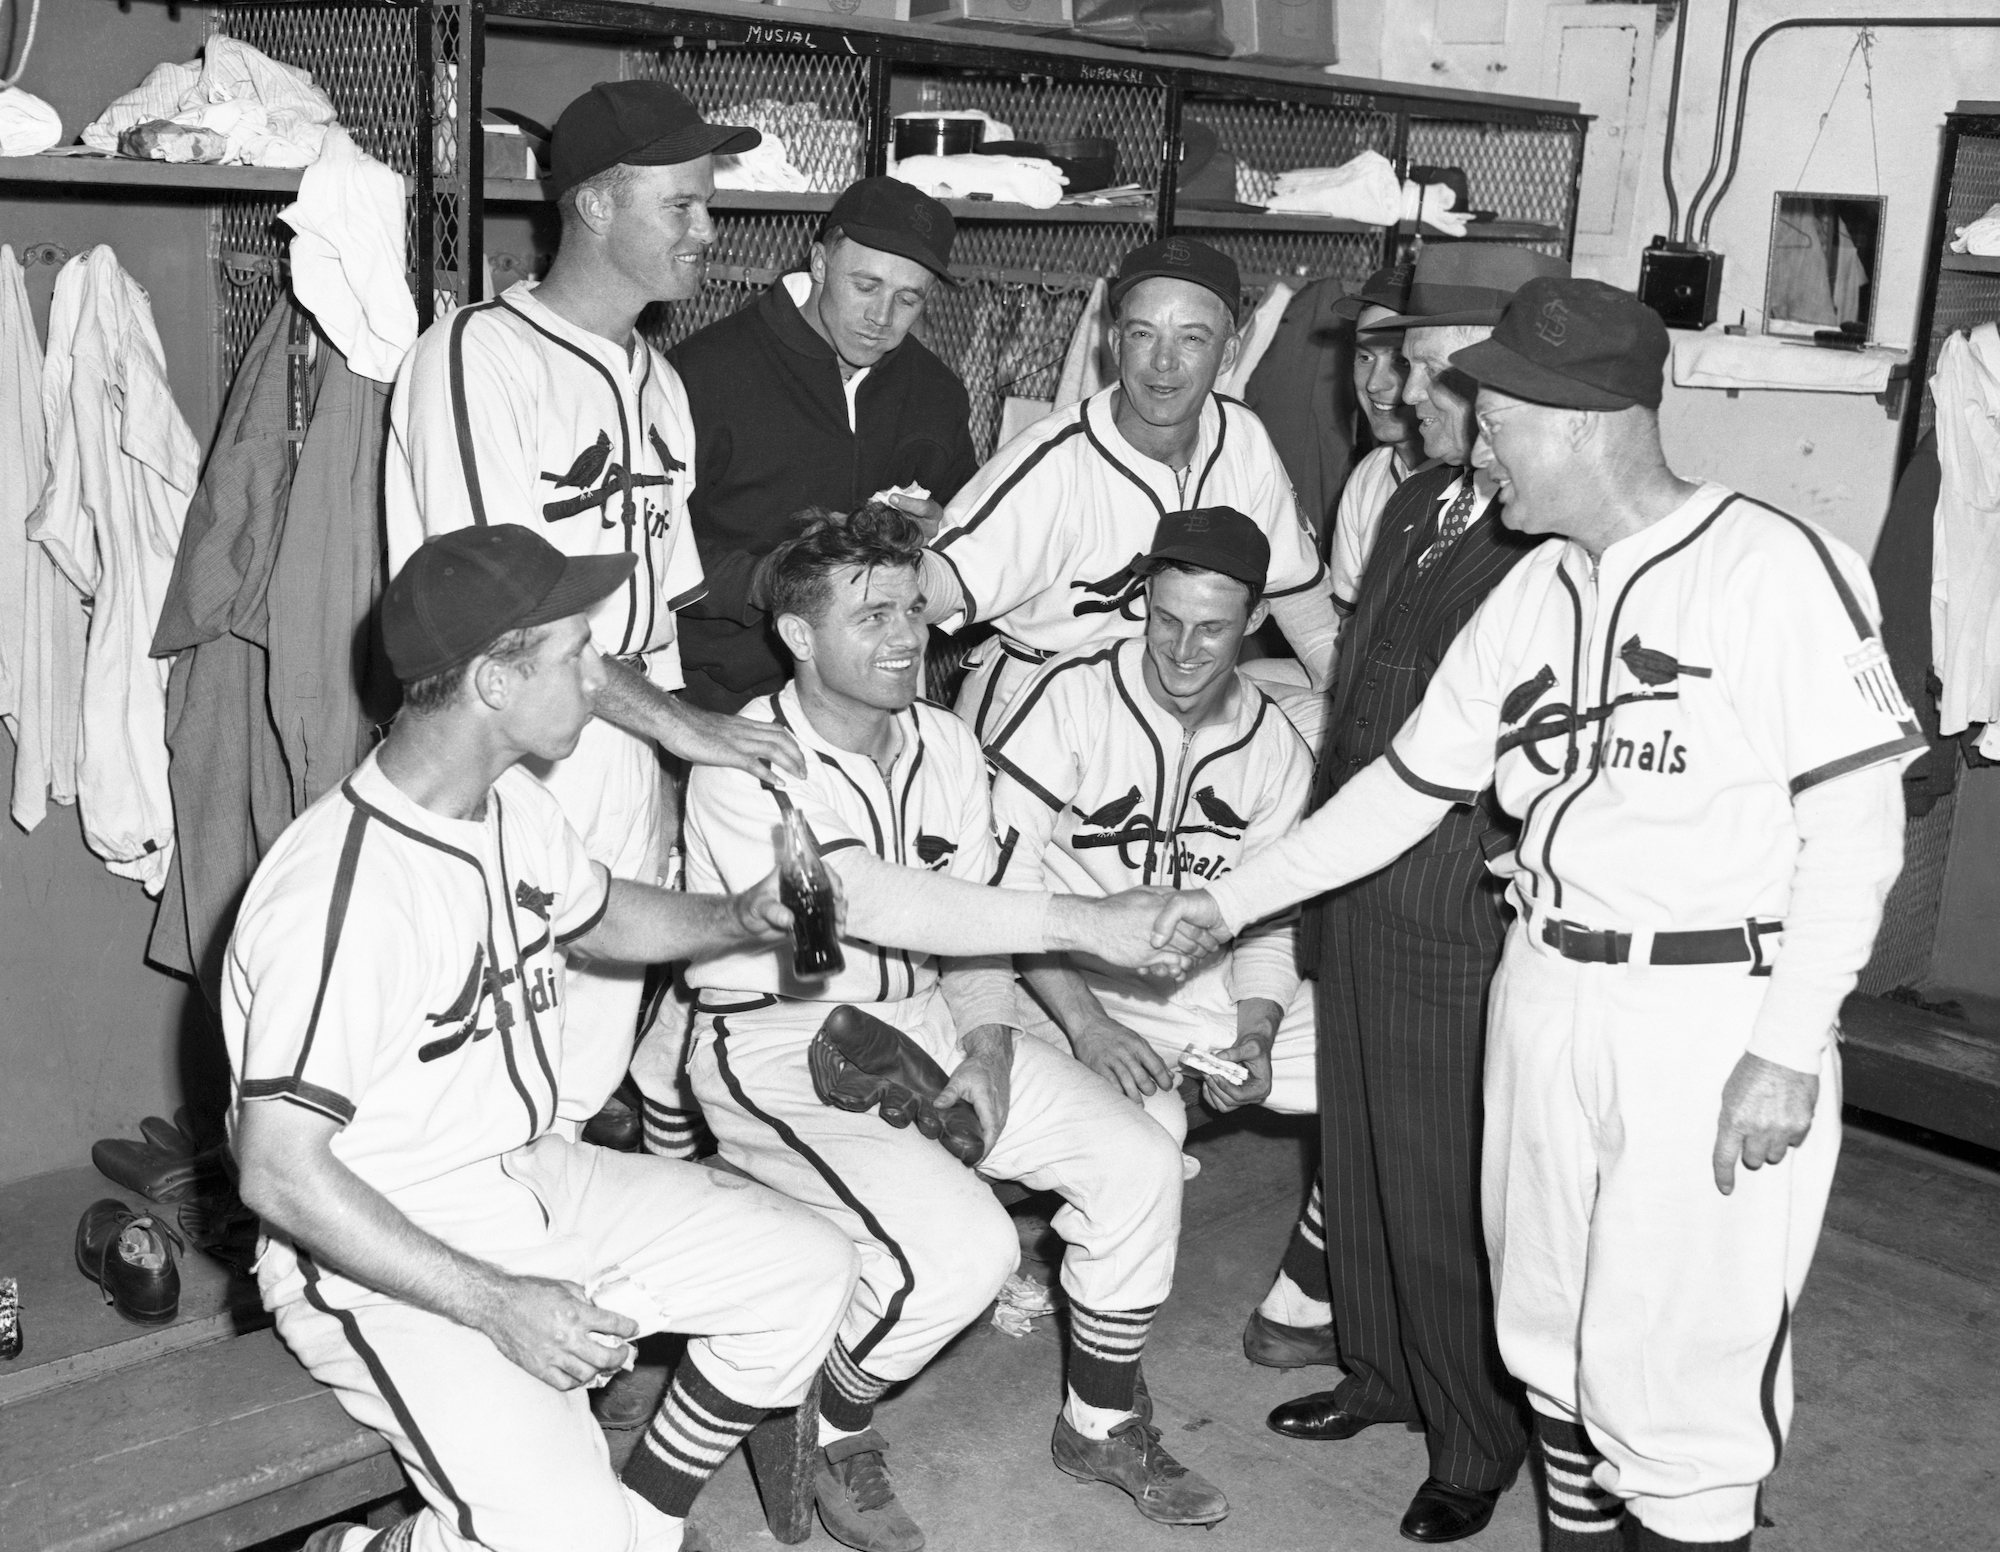 (Original Caption) Cardinals Clinch NL pennant. St. Louis, Missouri: Redbird coach Wares (right) shakes hands with winning pitcher Max Lanier, after the first game of a double header with the Cubs when the Cardinals clinched the National League pennant again this year. (Left to right seated) Chuck Klein; Lanier; Stan Musial; (left to right standing) George Munger; Ernie White; manager Billy Southworth; Danny Litwhiler; owner Sam Breadon, and Wares.